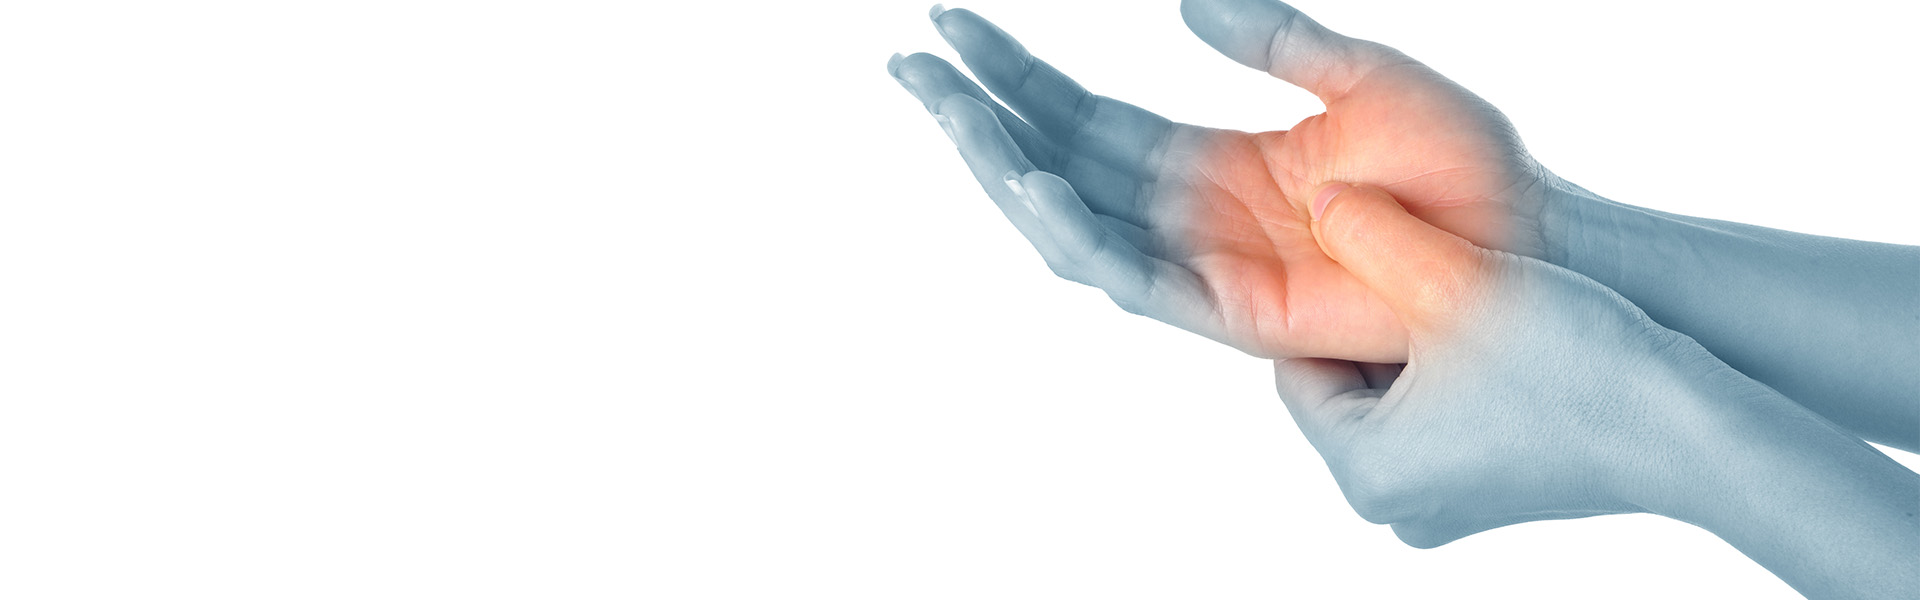 Hands showing chronic pain